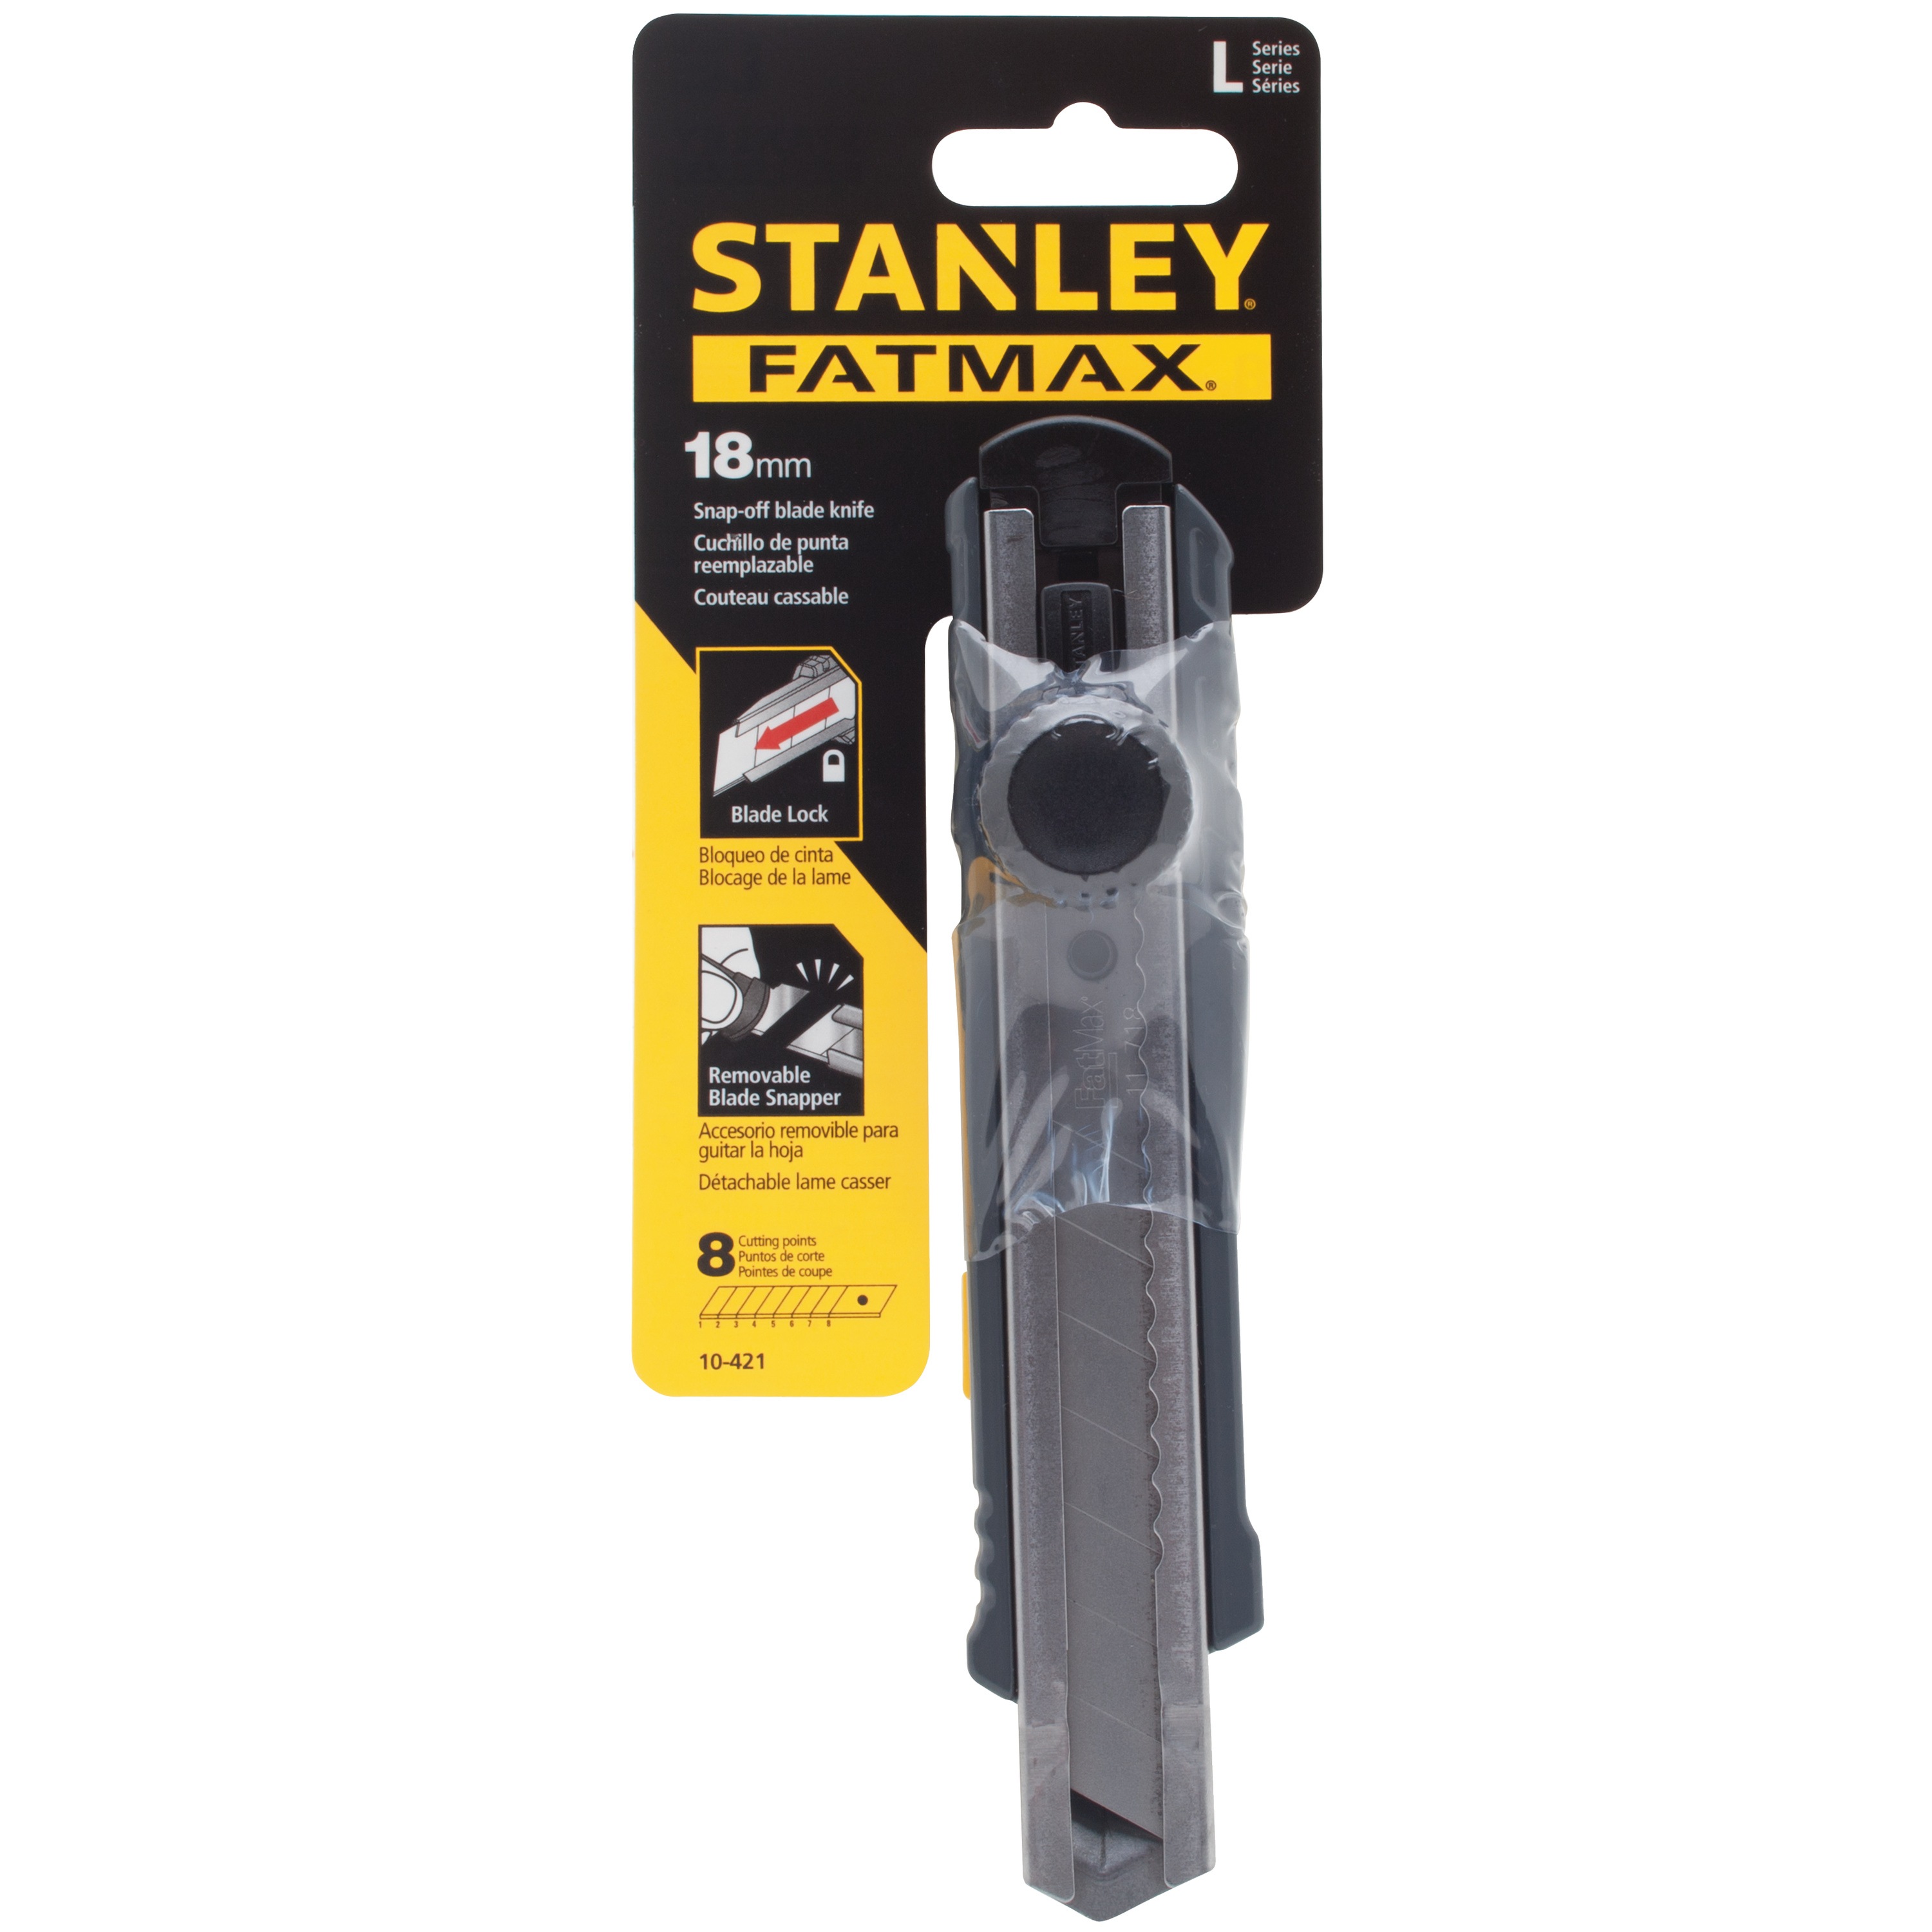 Stanley Tools - 18mm FATMAX SnapOff Knife - 10-421